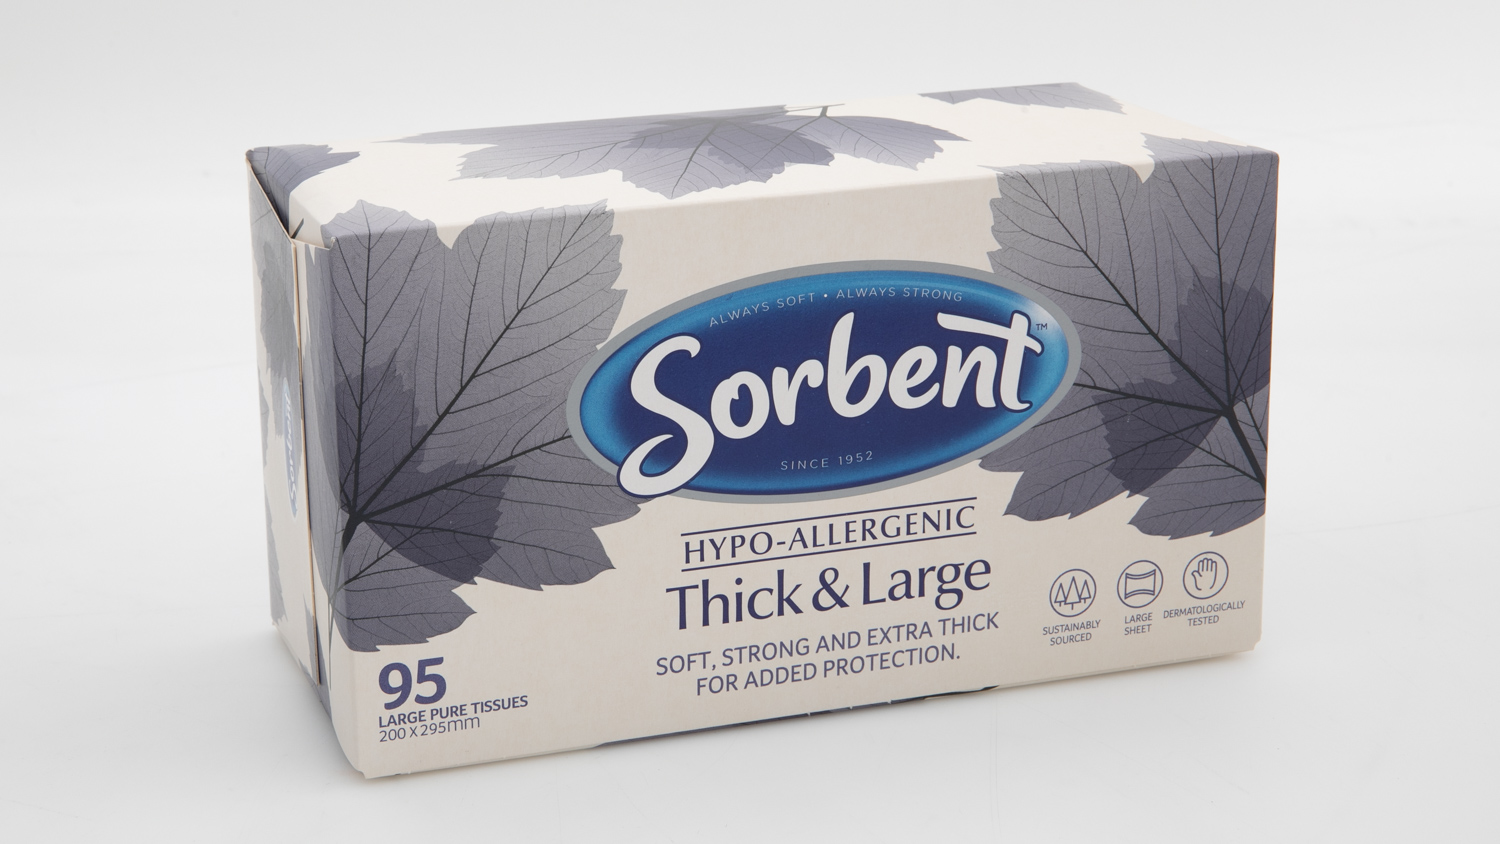 Sorbent Hypo-allergenic Thick & Large 95 tissues carousel image